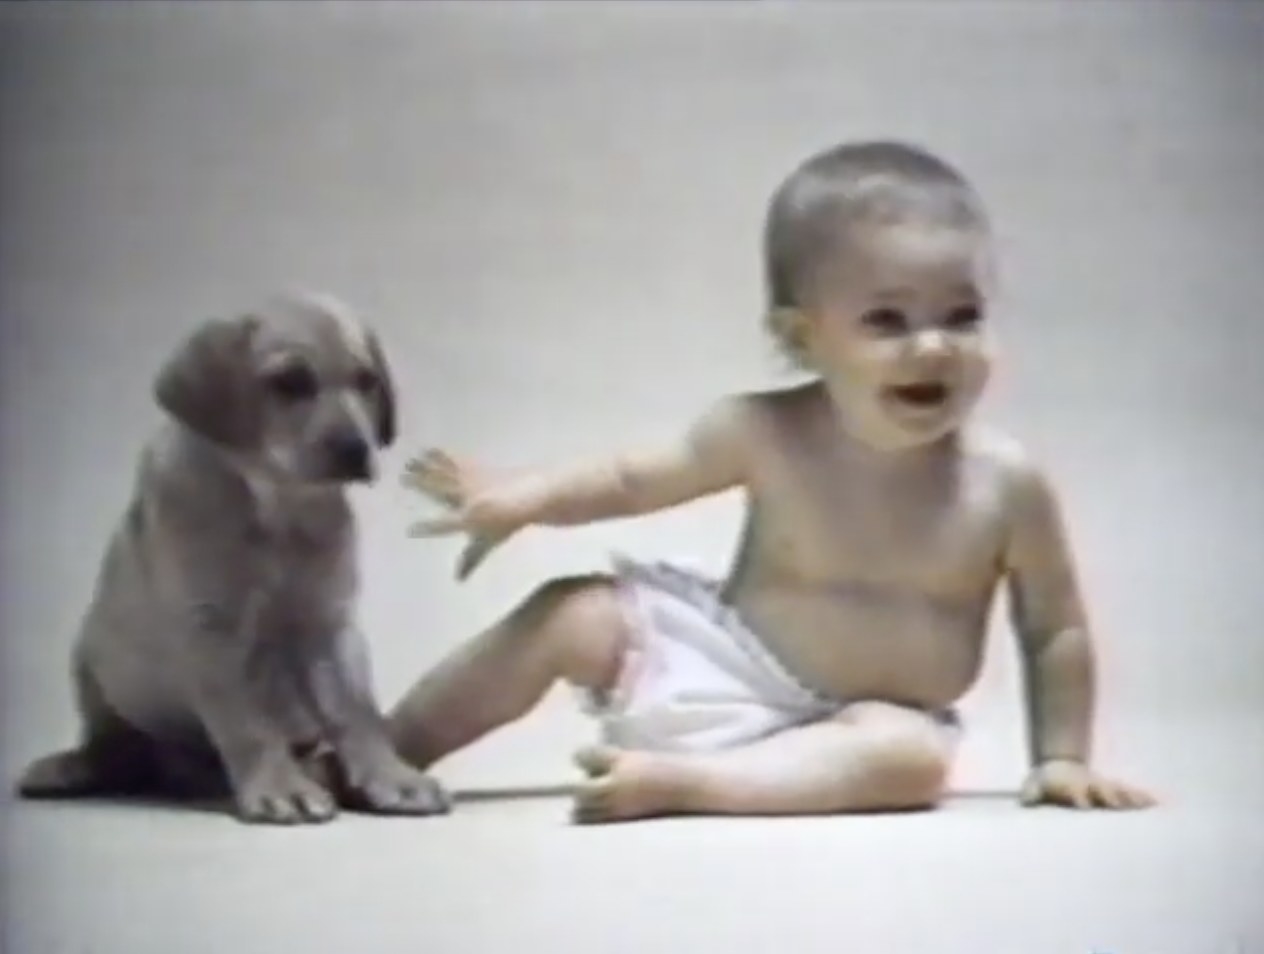 Drew Barrymore as a baby in a dog-food commercial